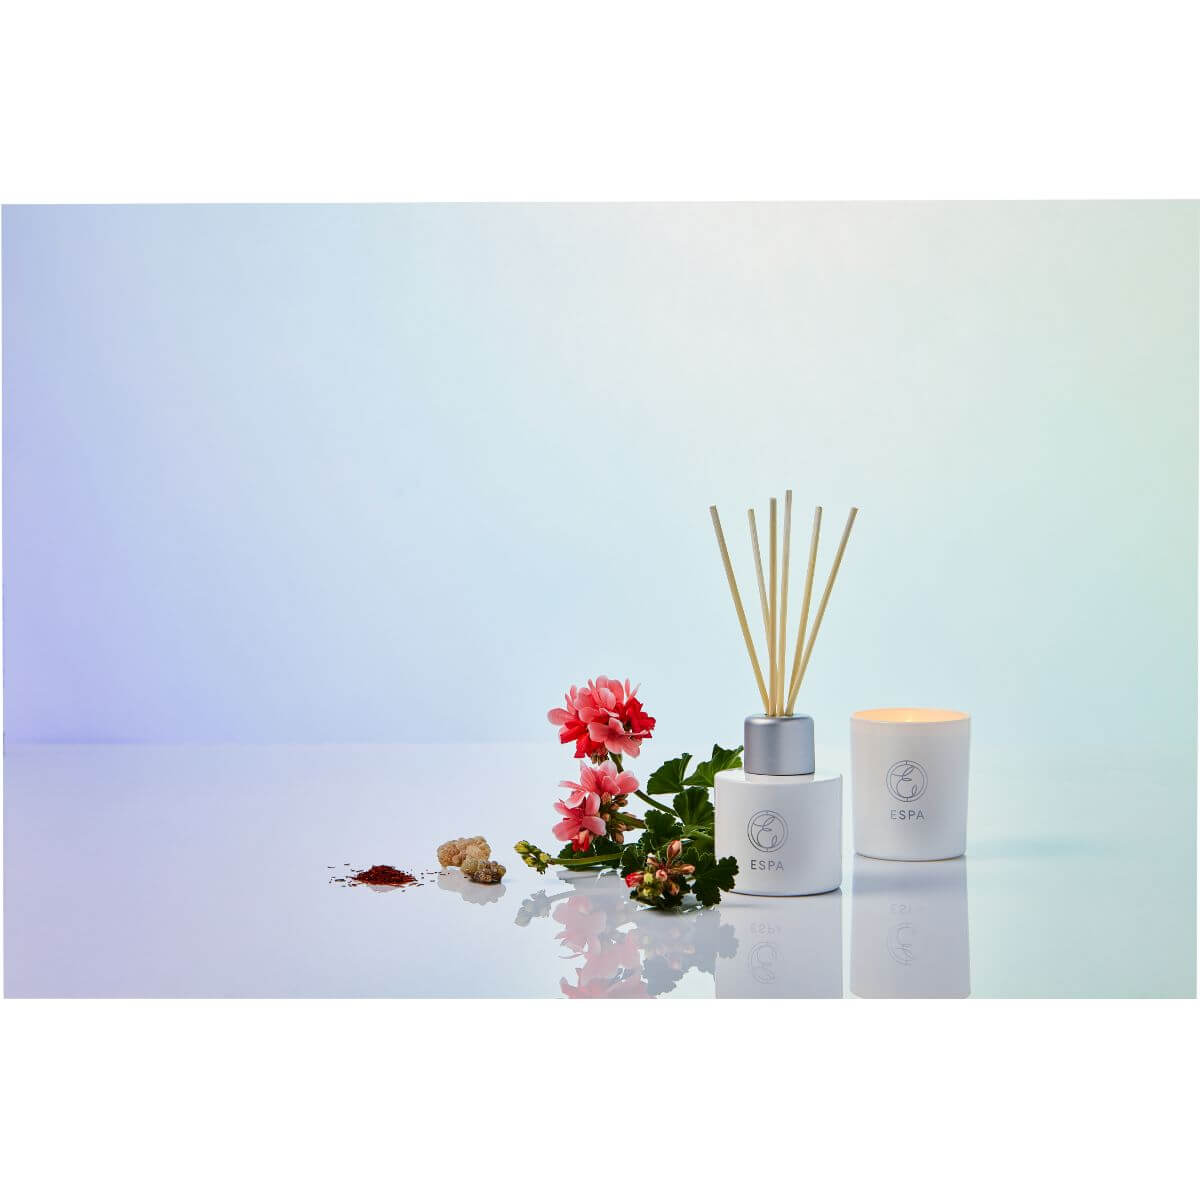 ESPA 舒緩擴香組 Soothing Aroma Reed Diffuser 200ml